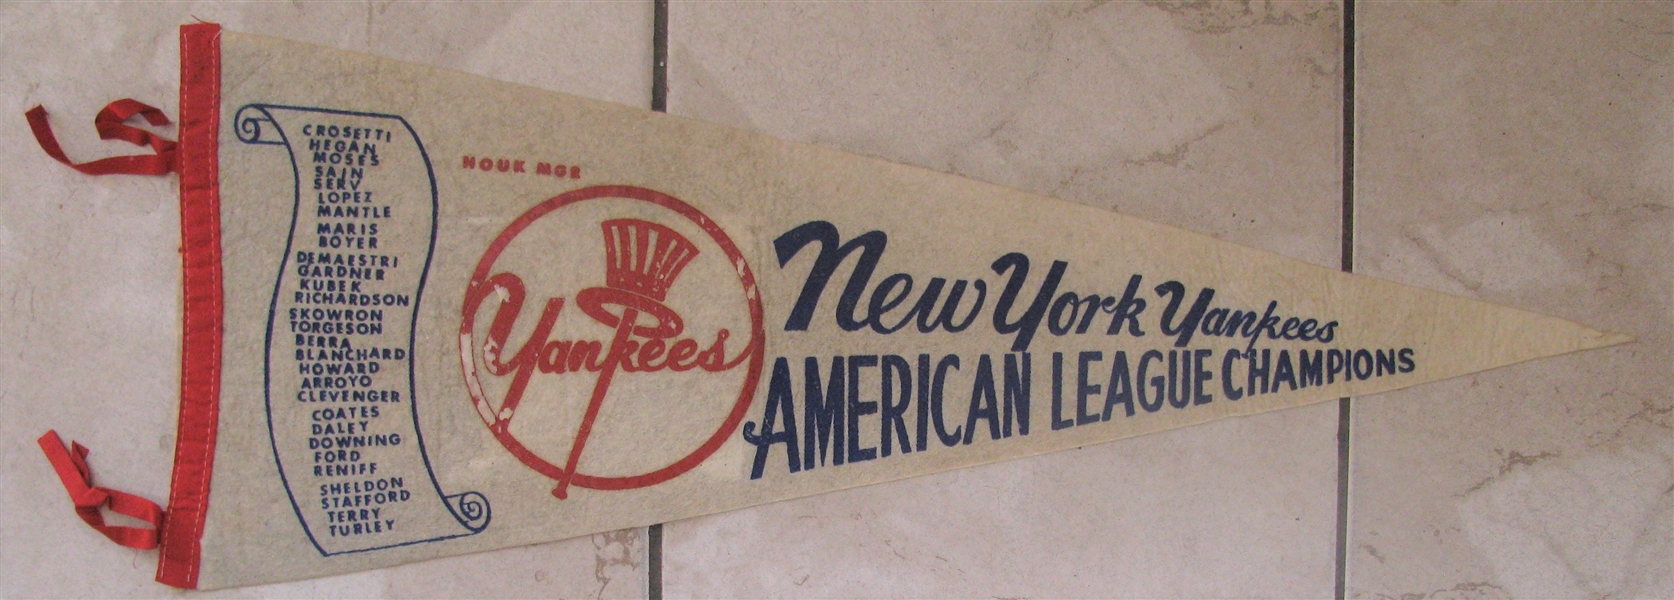 1960's NEW YORK YANKEES AMERICAN LEAGUE CHAMPIONS PLAYER SCROLL PENNANT